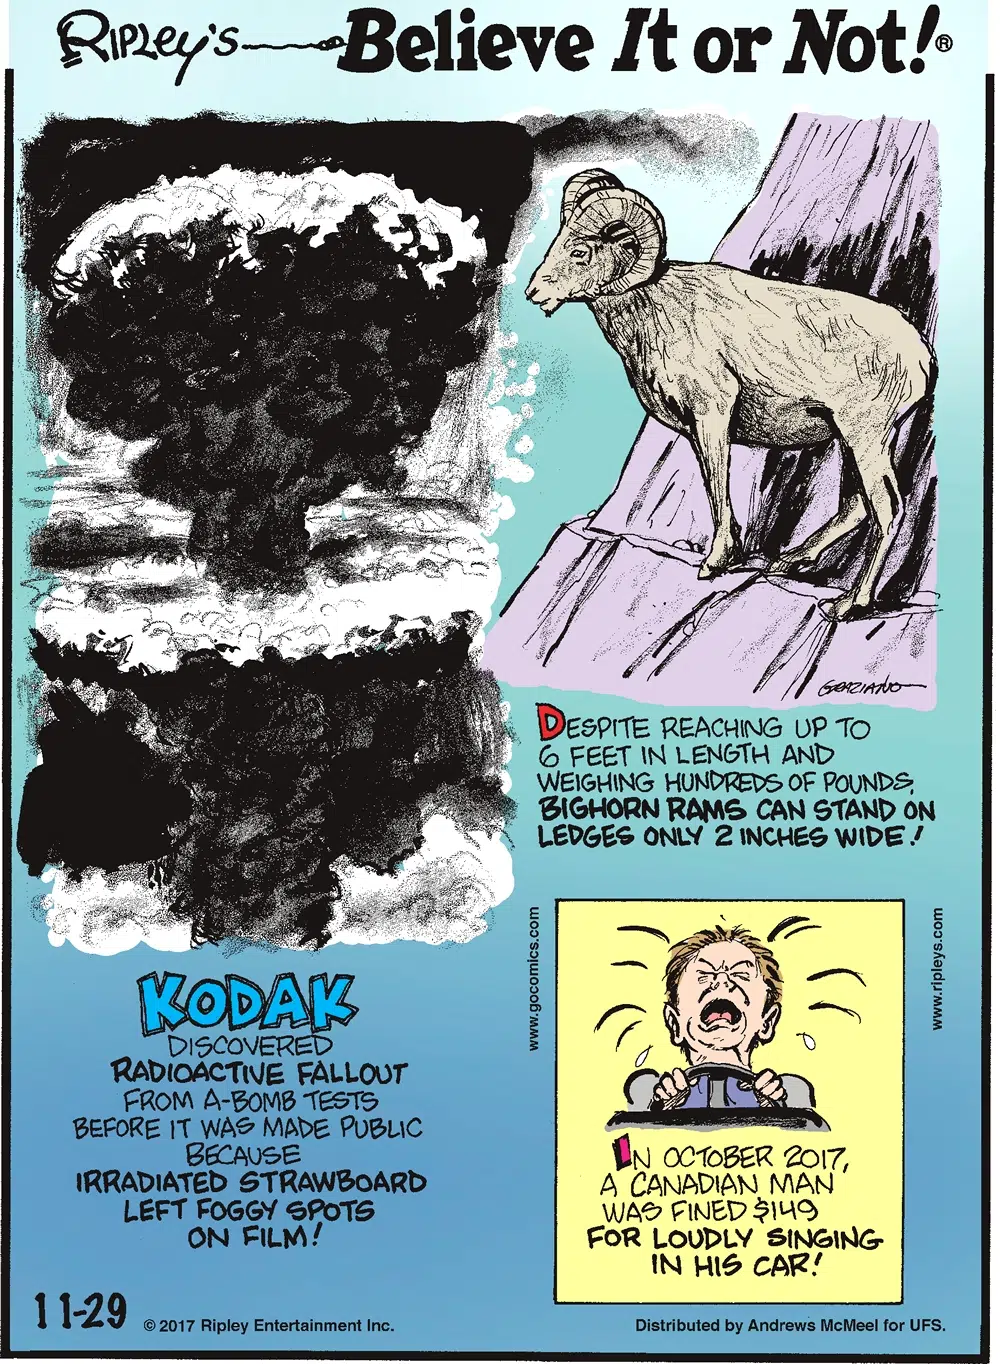 Despite reaching up to 6 feet in length and weighing hundreds of pounds, bighorn rams can stand on ledges only 2 inches wide!-------------------- Kodak discovered radioactive fallout from a-bomb tests before it was made public because irradiated strawboard left foggy spots on film!-------------------- In October 2017, a Canadian man was fined $149 for loudly singing in his car!